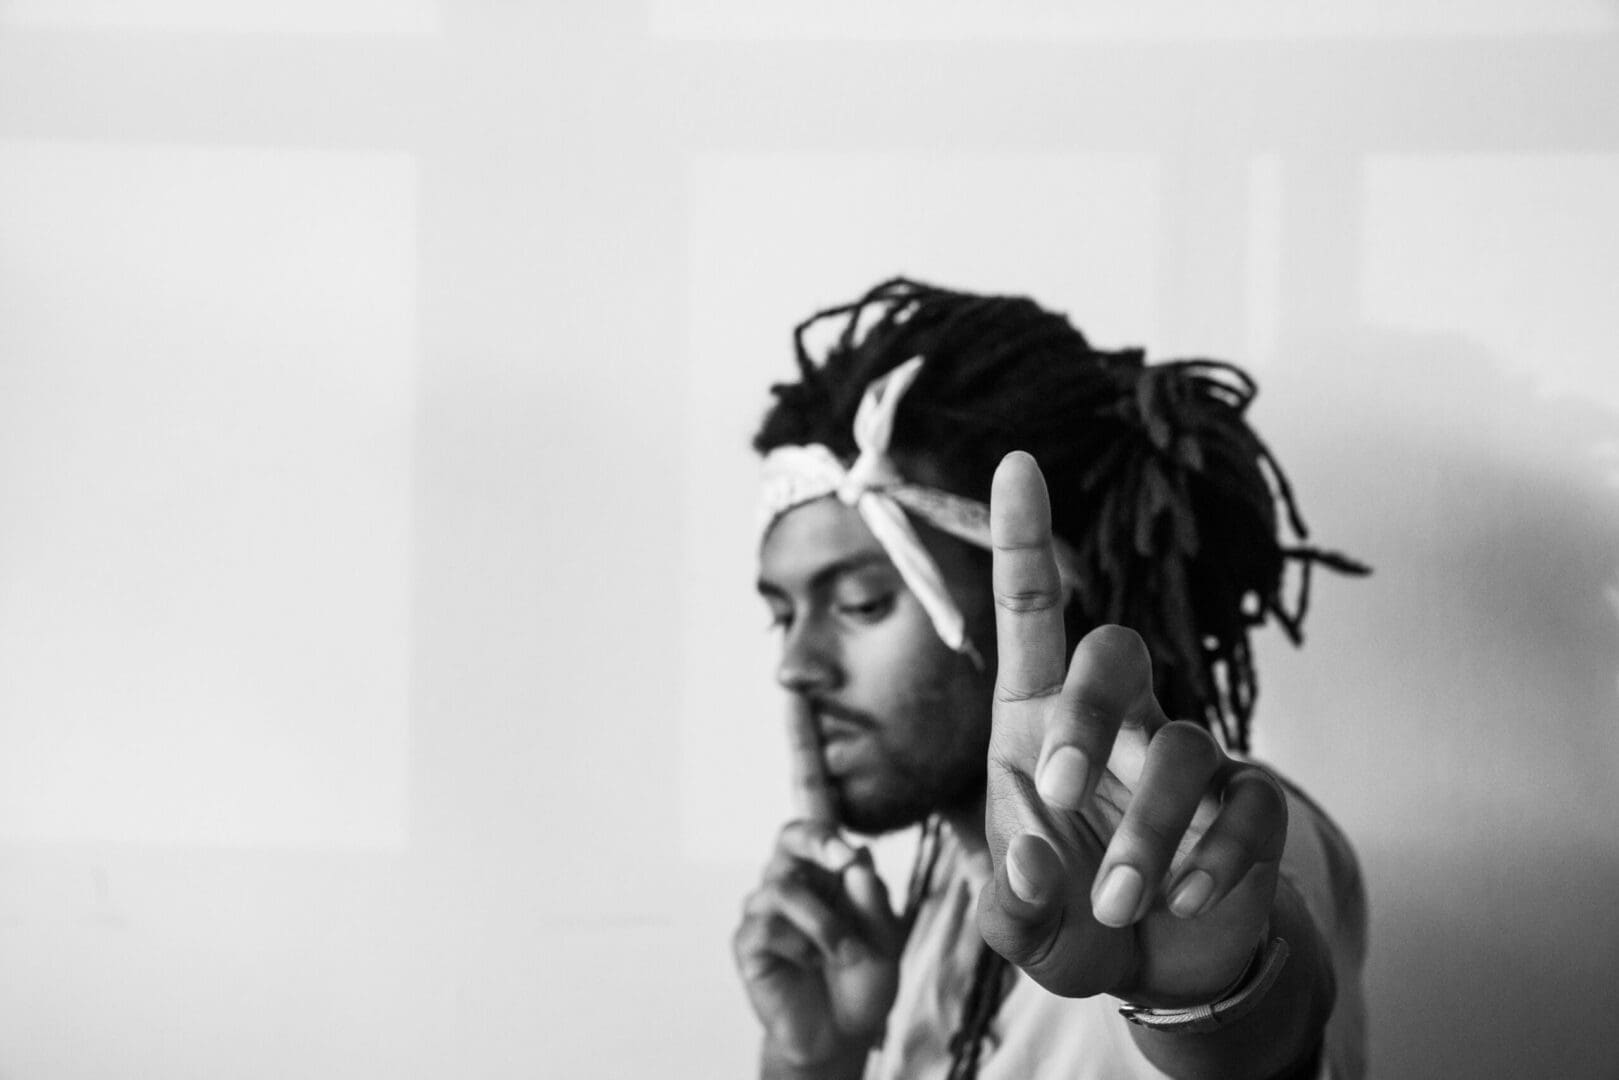 A man with dreadlocks is holding up his middle finger.